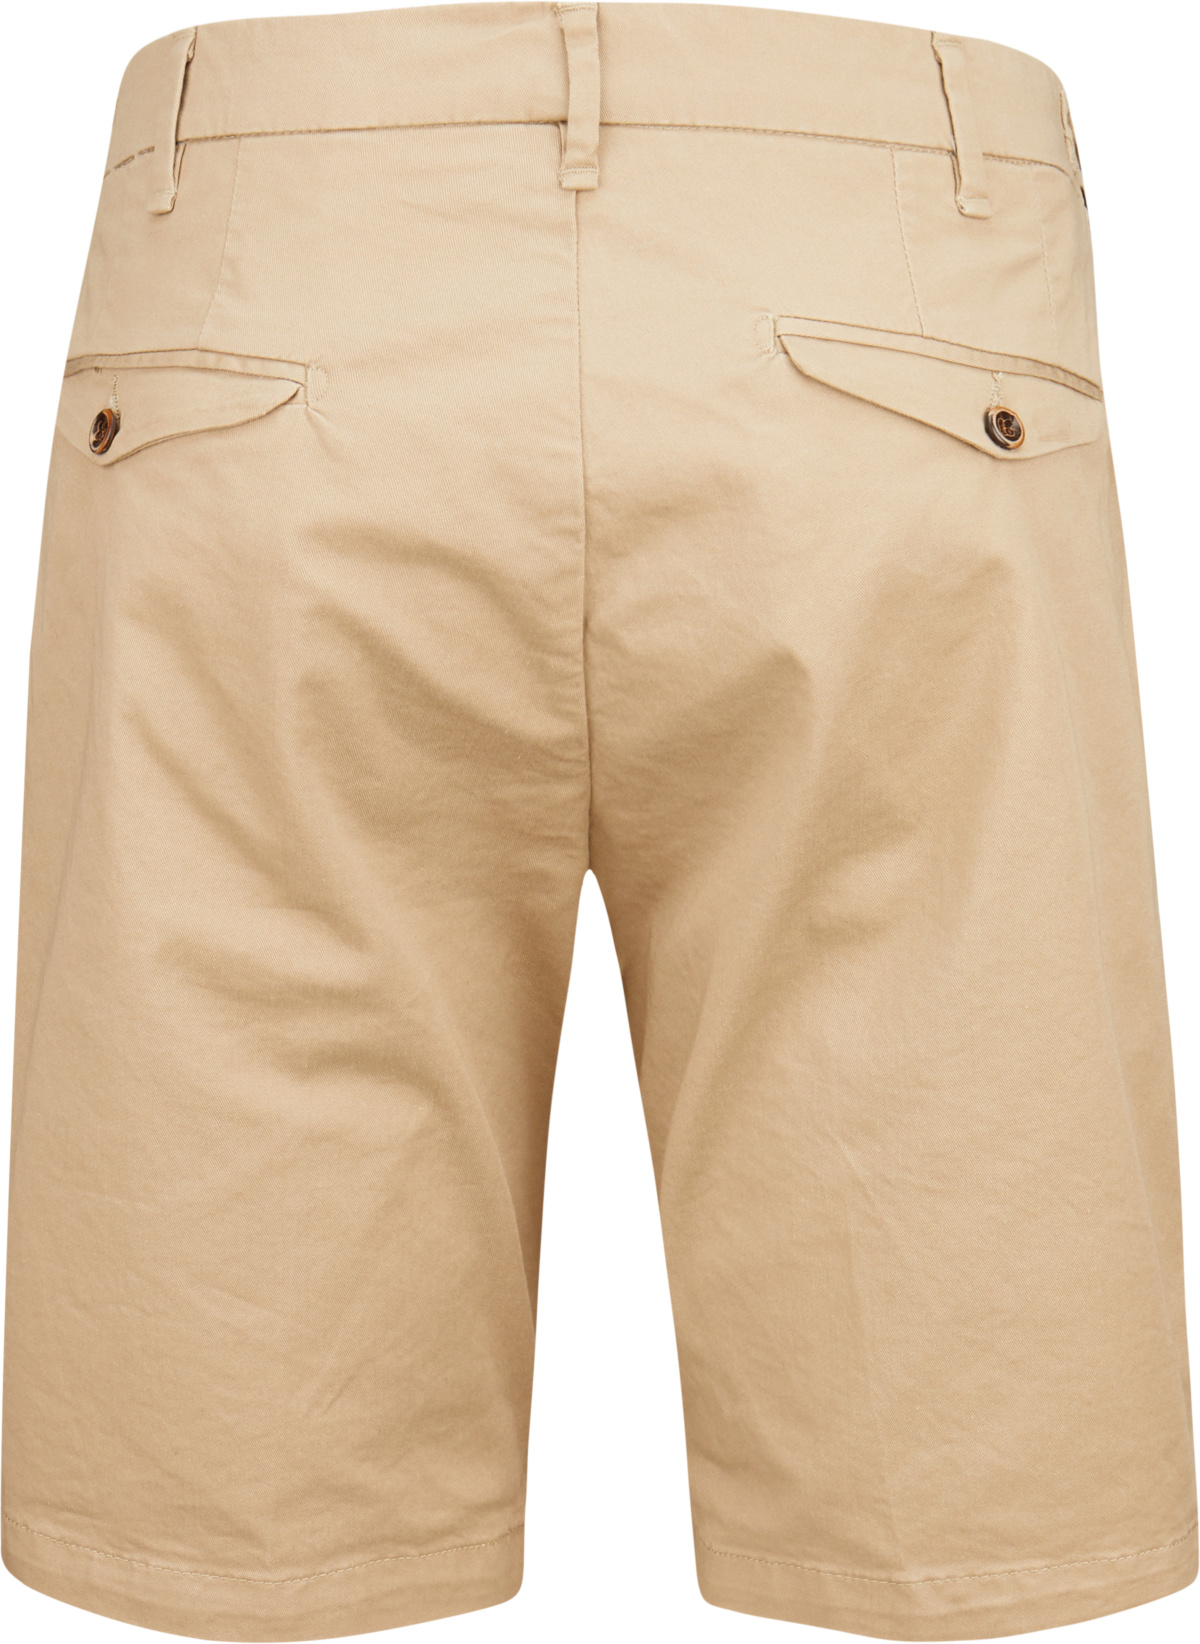 Myths Shorts in Beige 436202